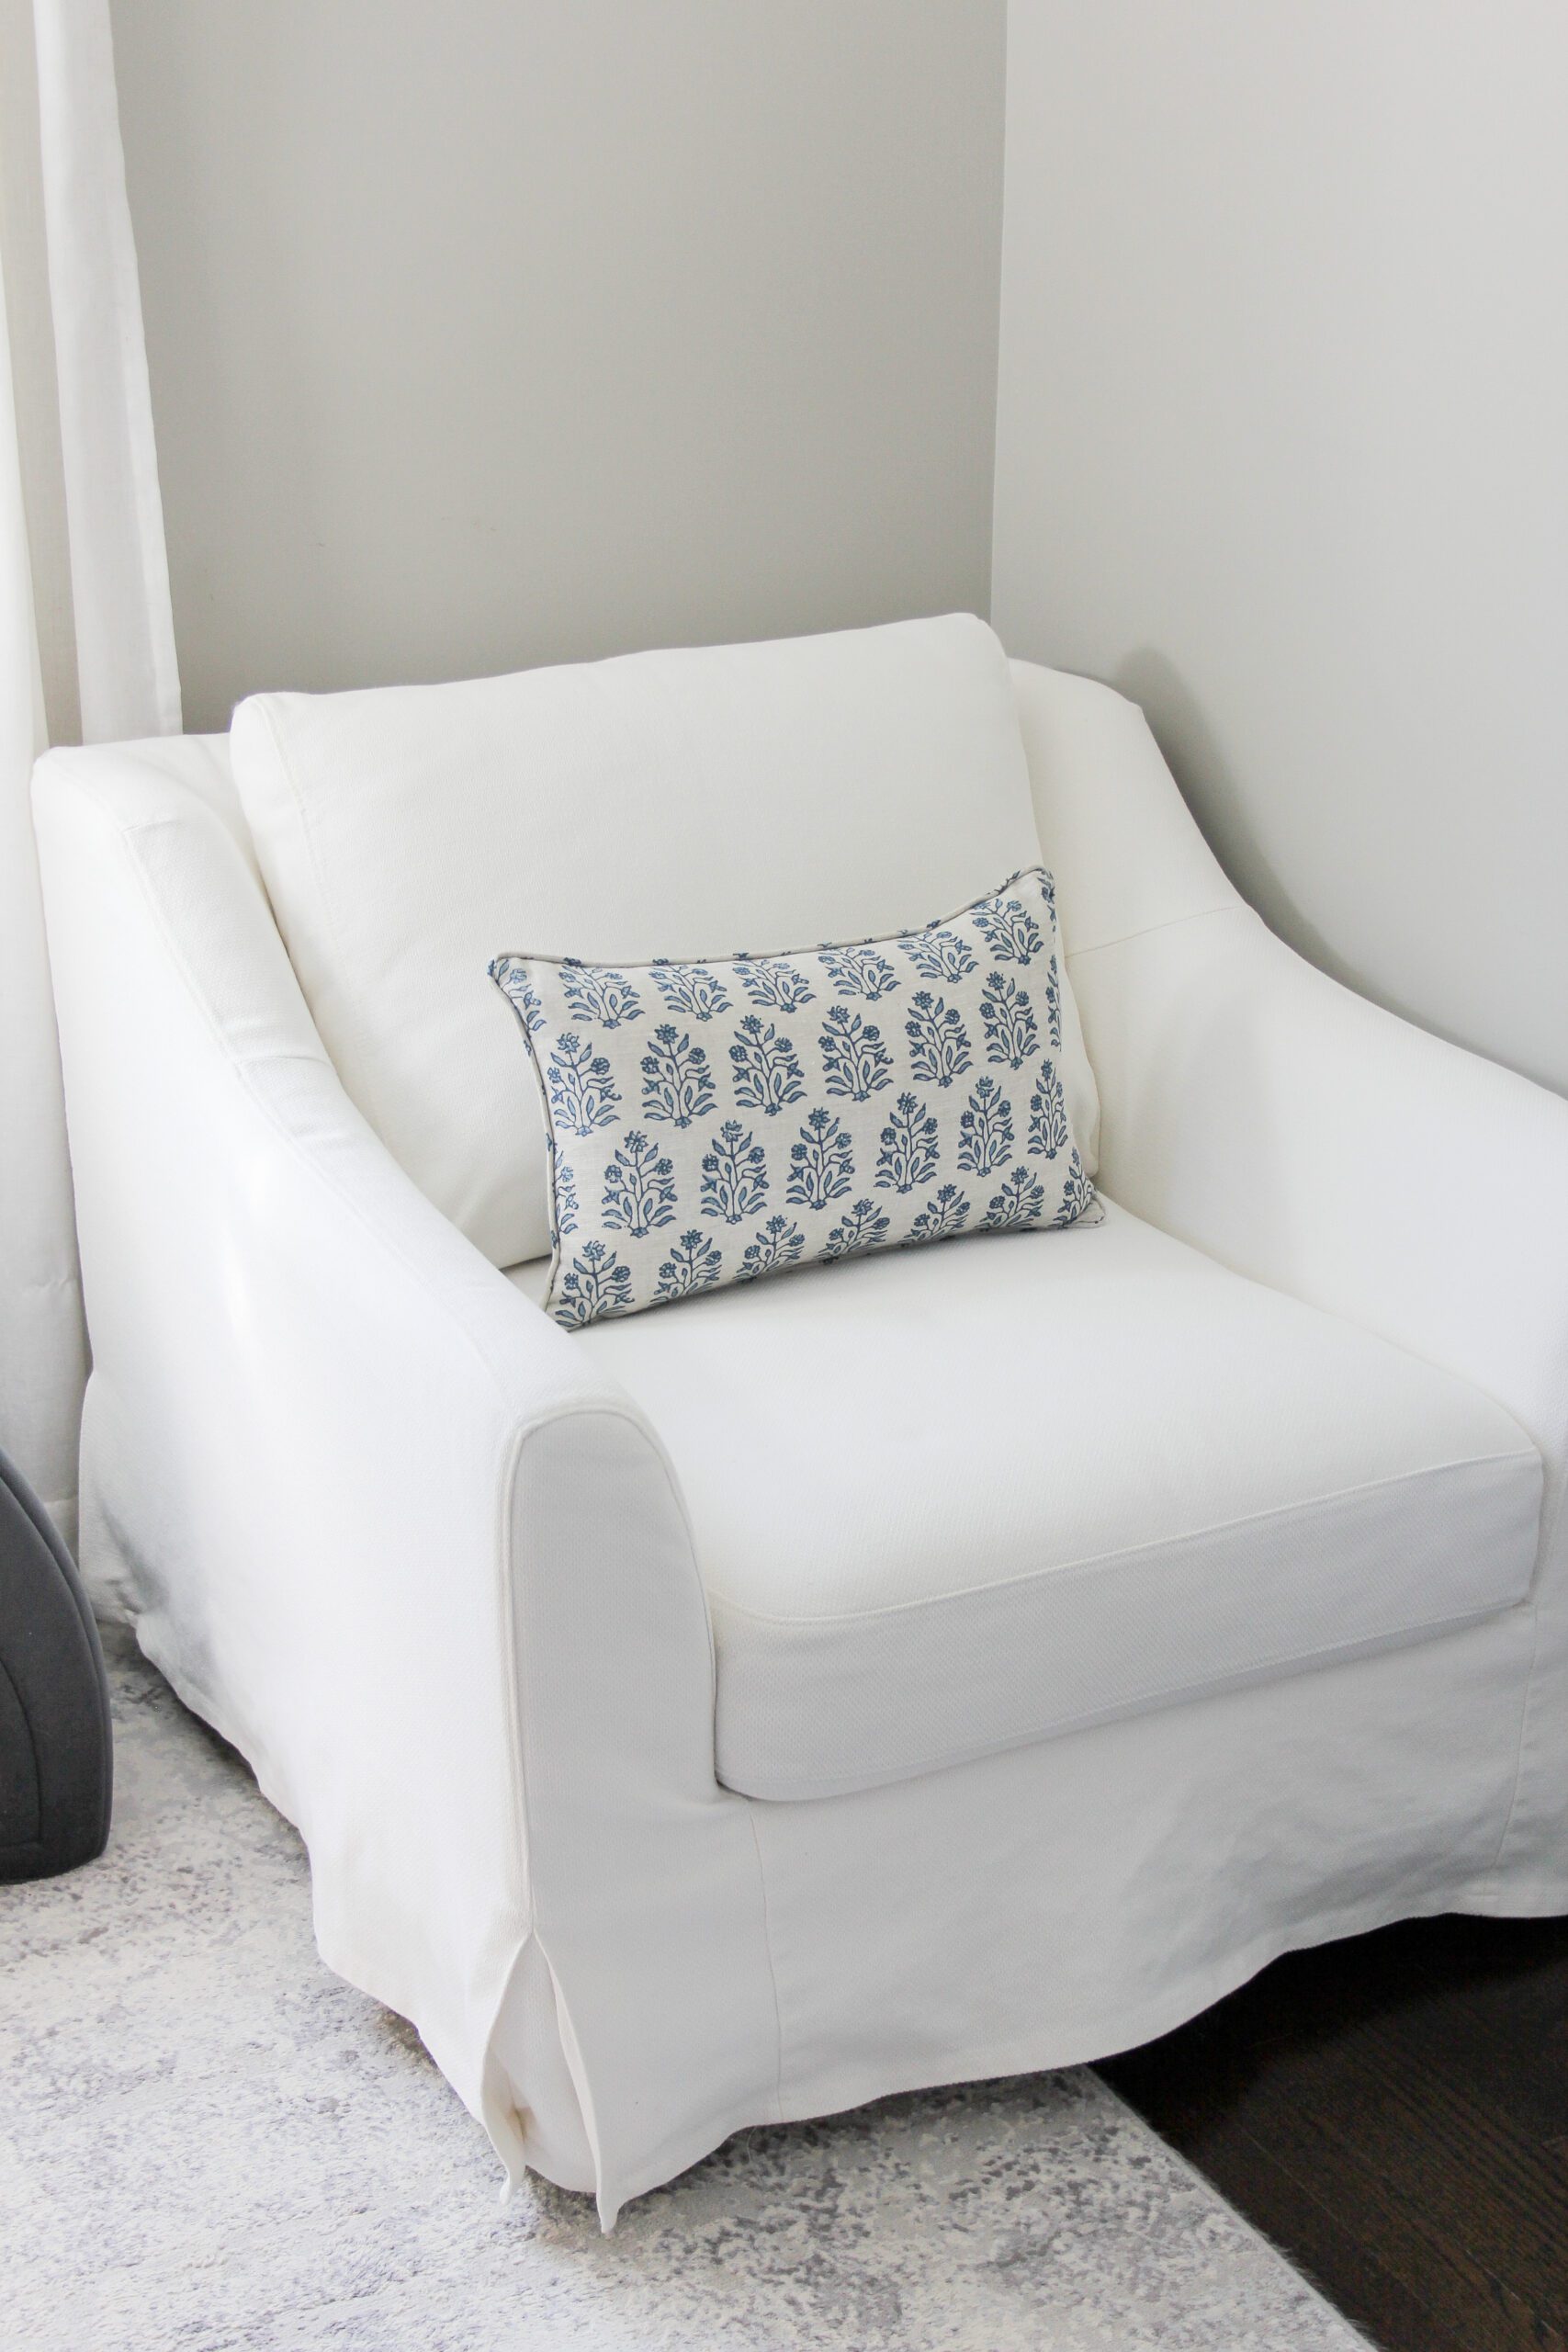 ikea farlov slipcovered chair with a patterned spring lumbar pillow